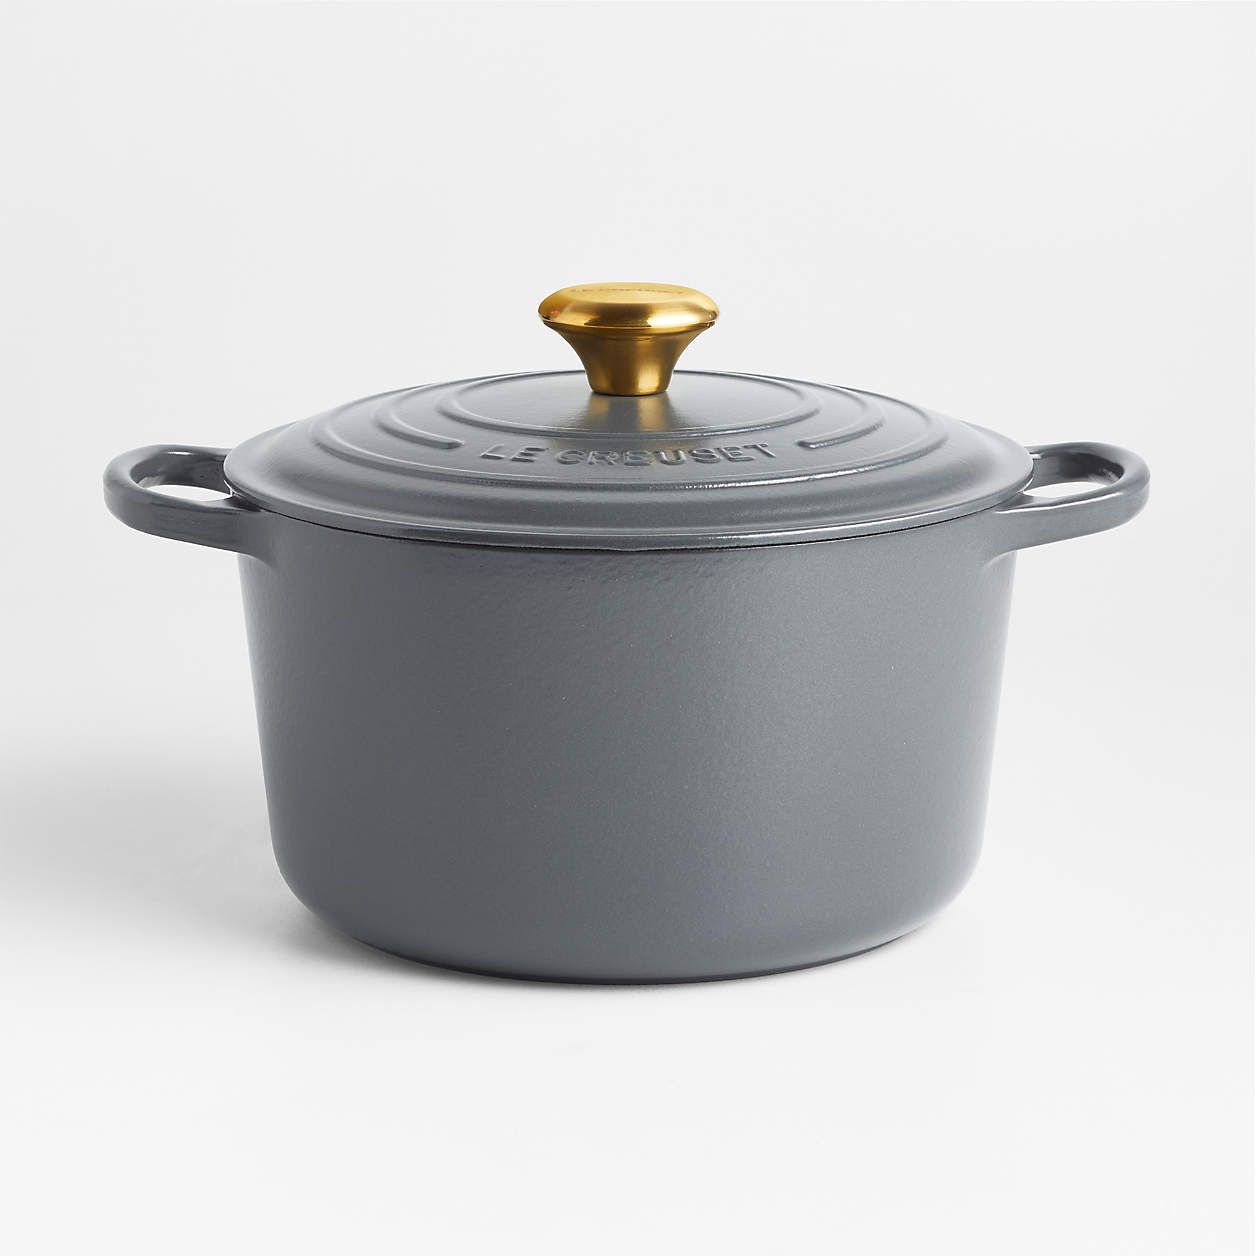 Le Creuset Deep Round 5.25-Qt. White Enameled Cast Iron Dutch Oven with Lid + Reviews | Crate & B... | Crate & Barrel